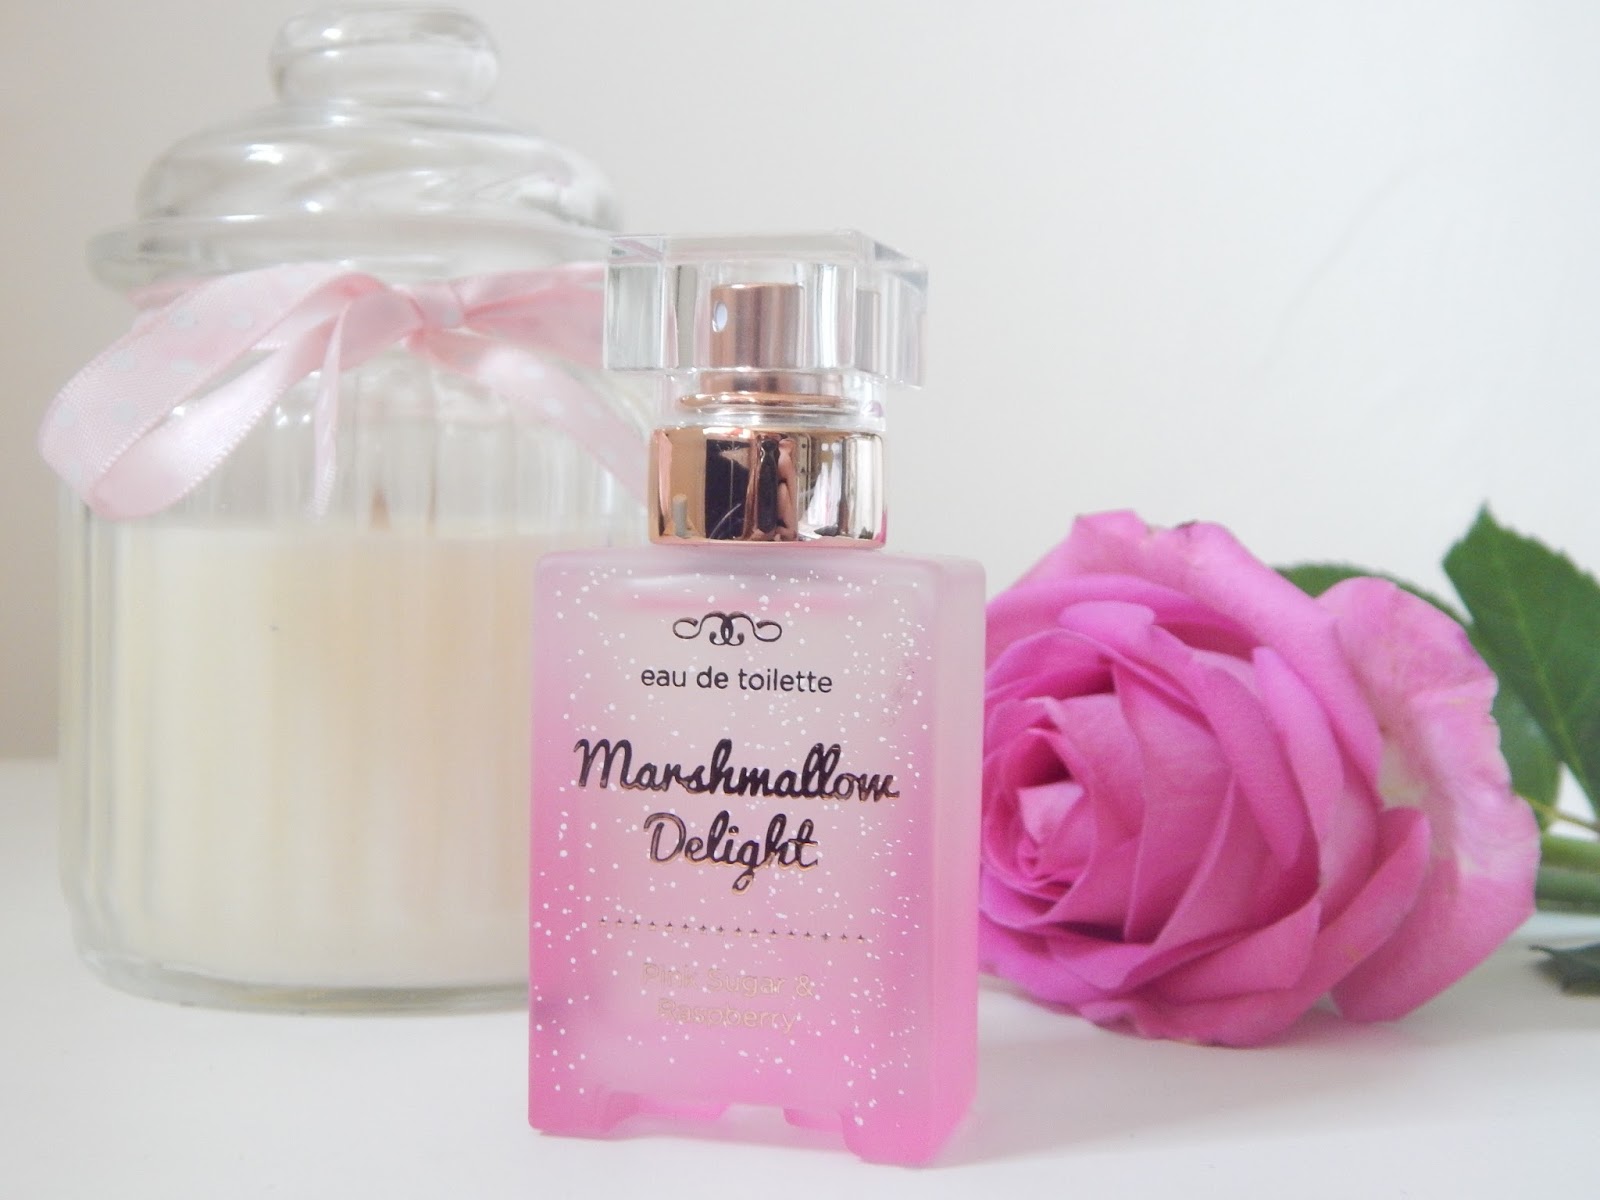 perfume that smells like candy floss